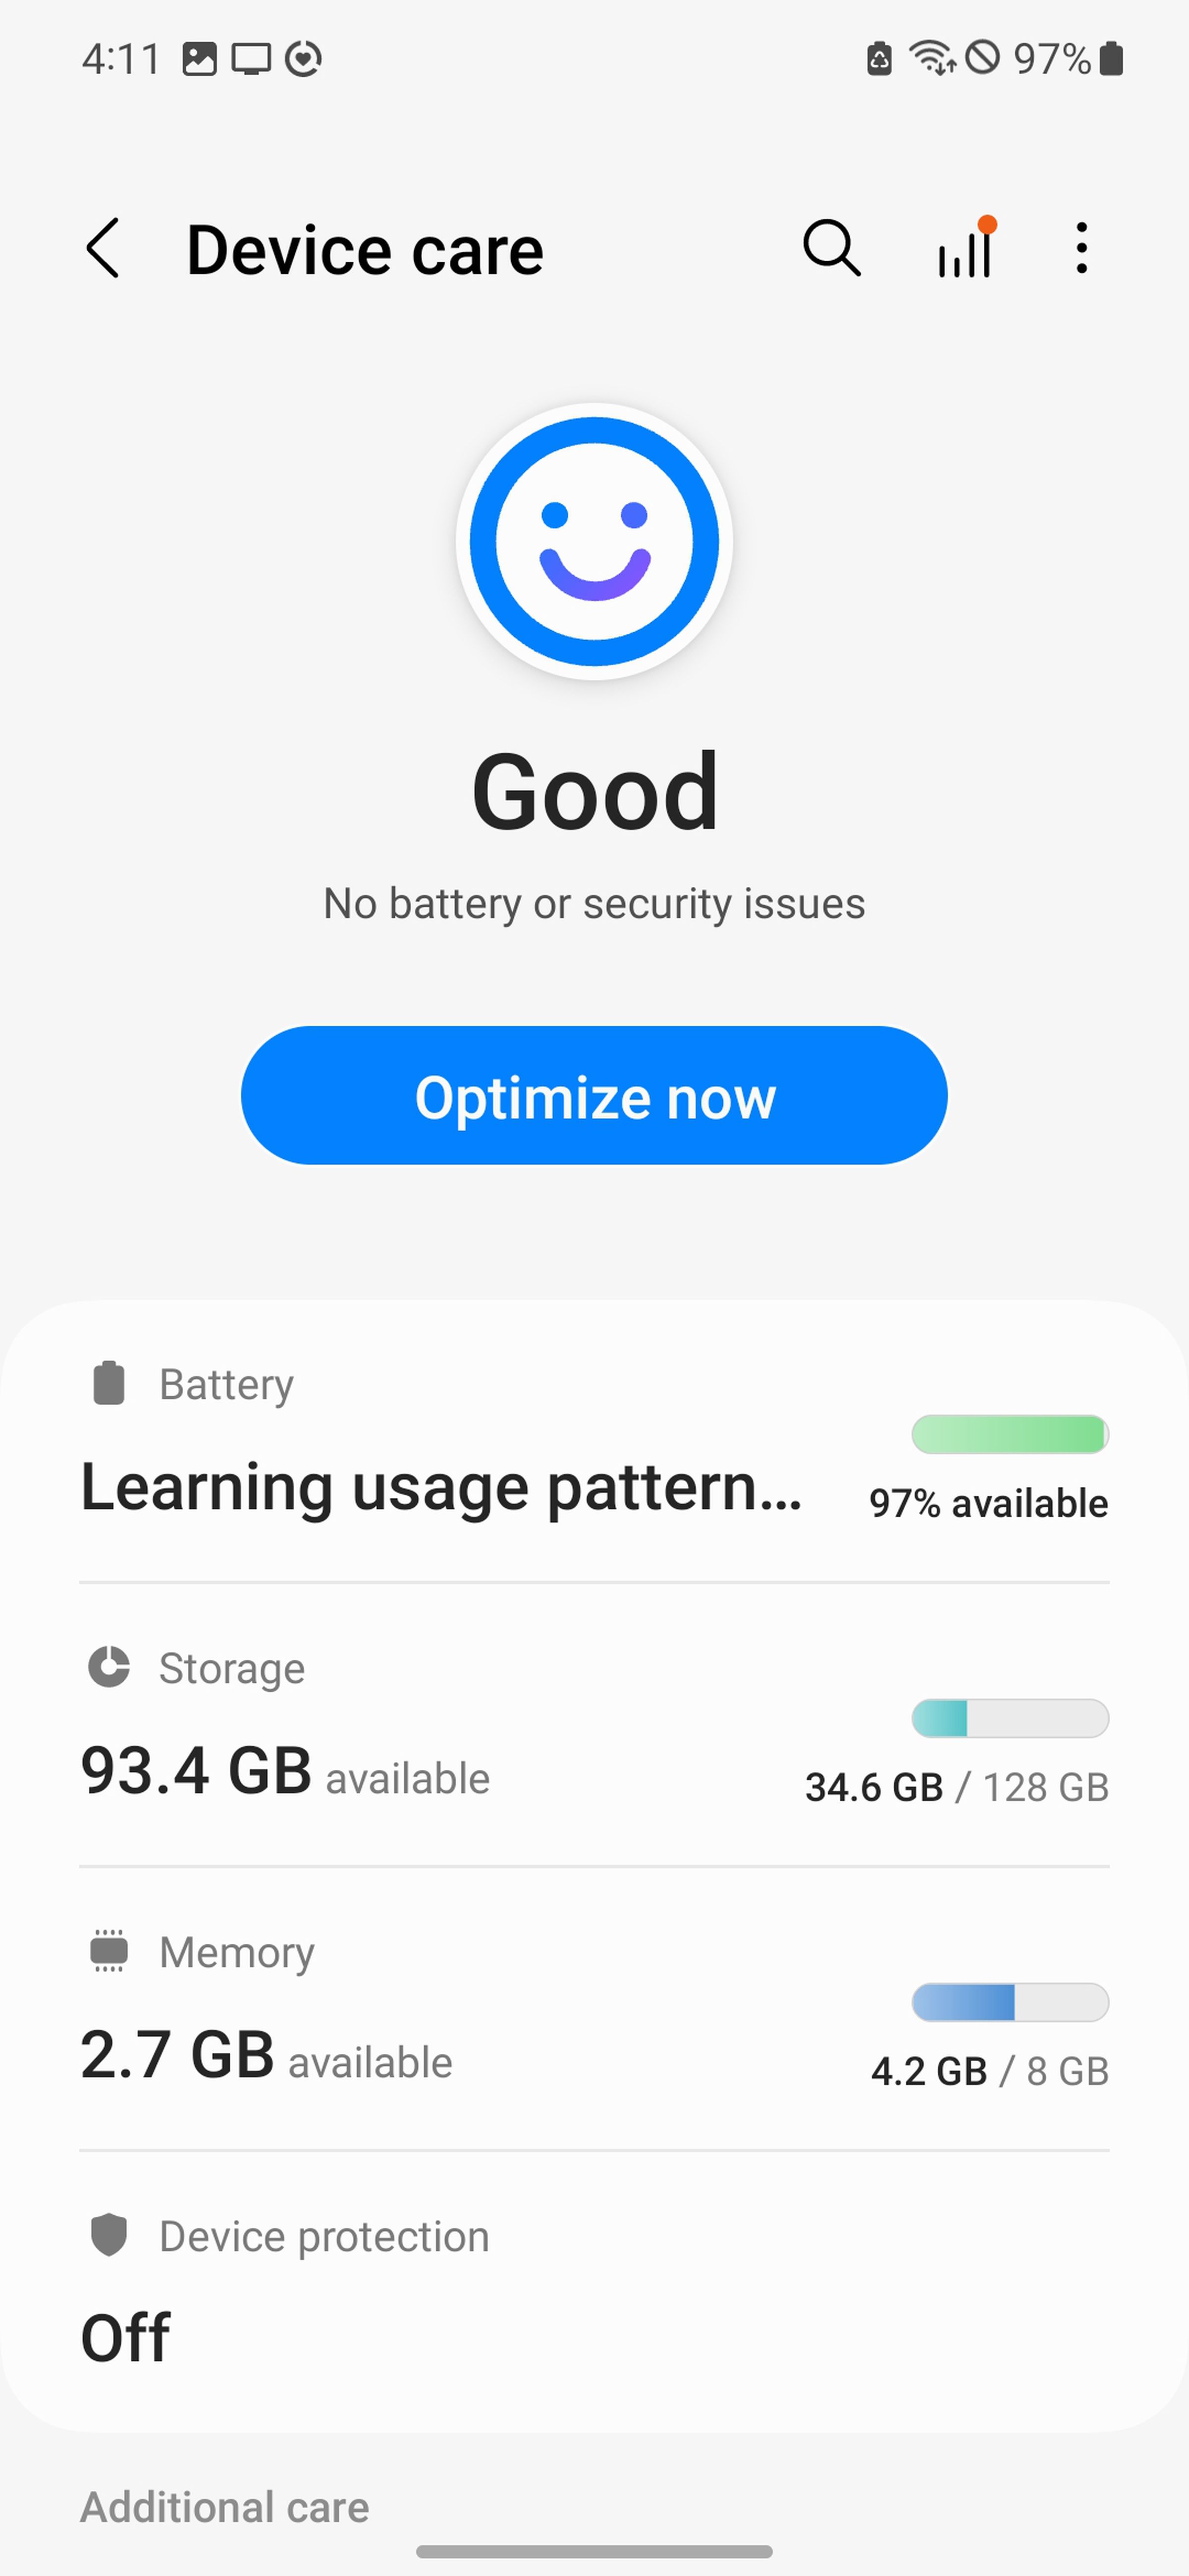 Device care page with a smiley face, the word “Good,” a blue “optimize now” button, and several lines showing status of battery, storage, memory.